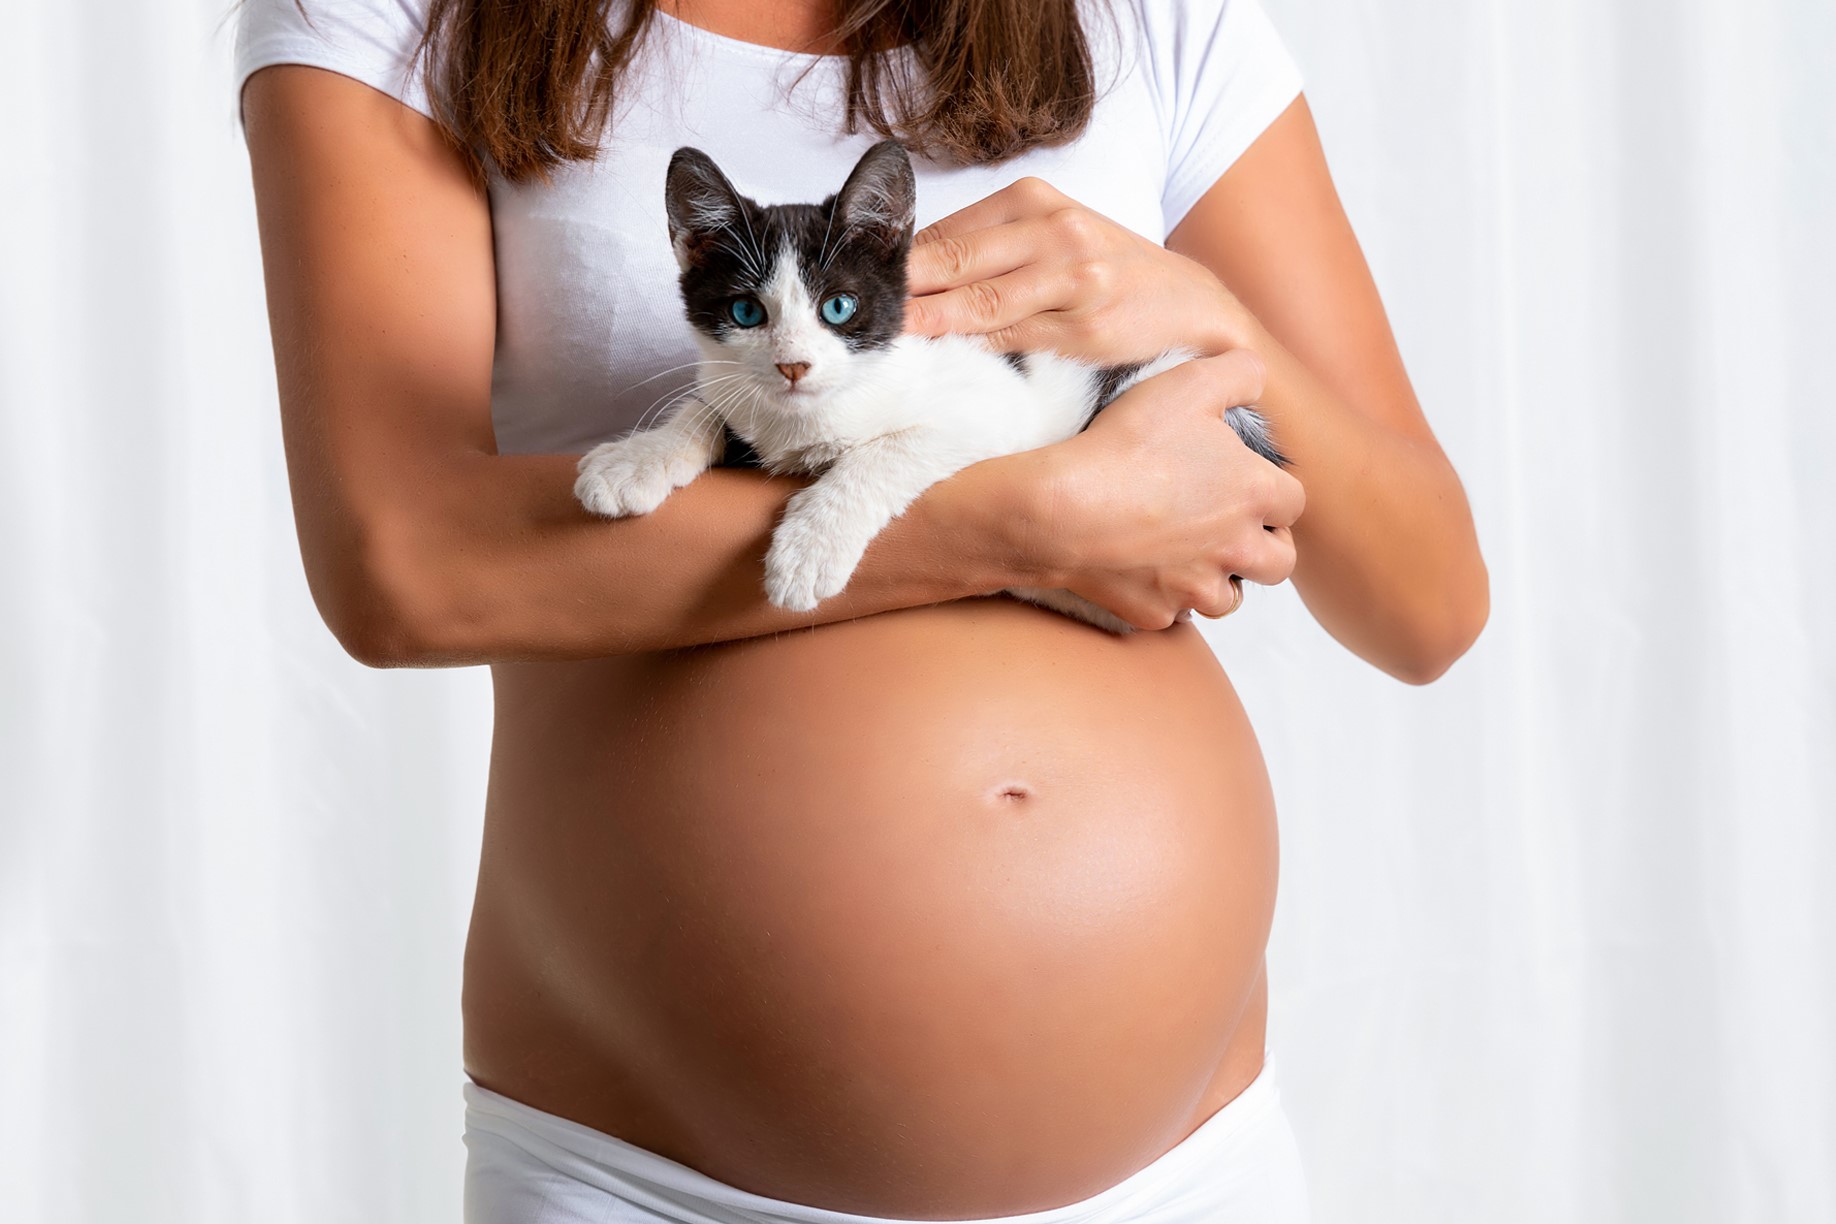 Pregnant? Here’s The Safest Way To Clean A Litter Box!